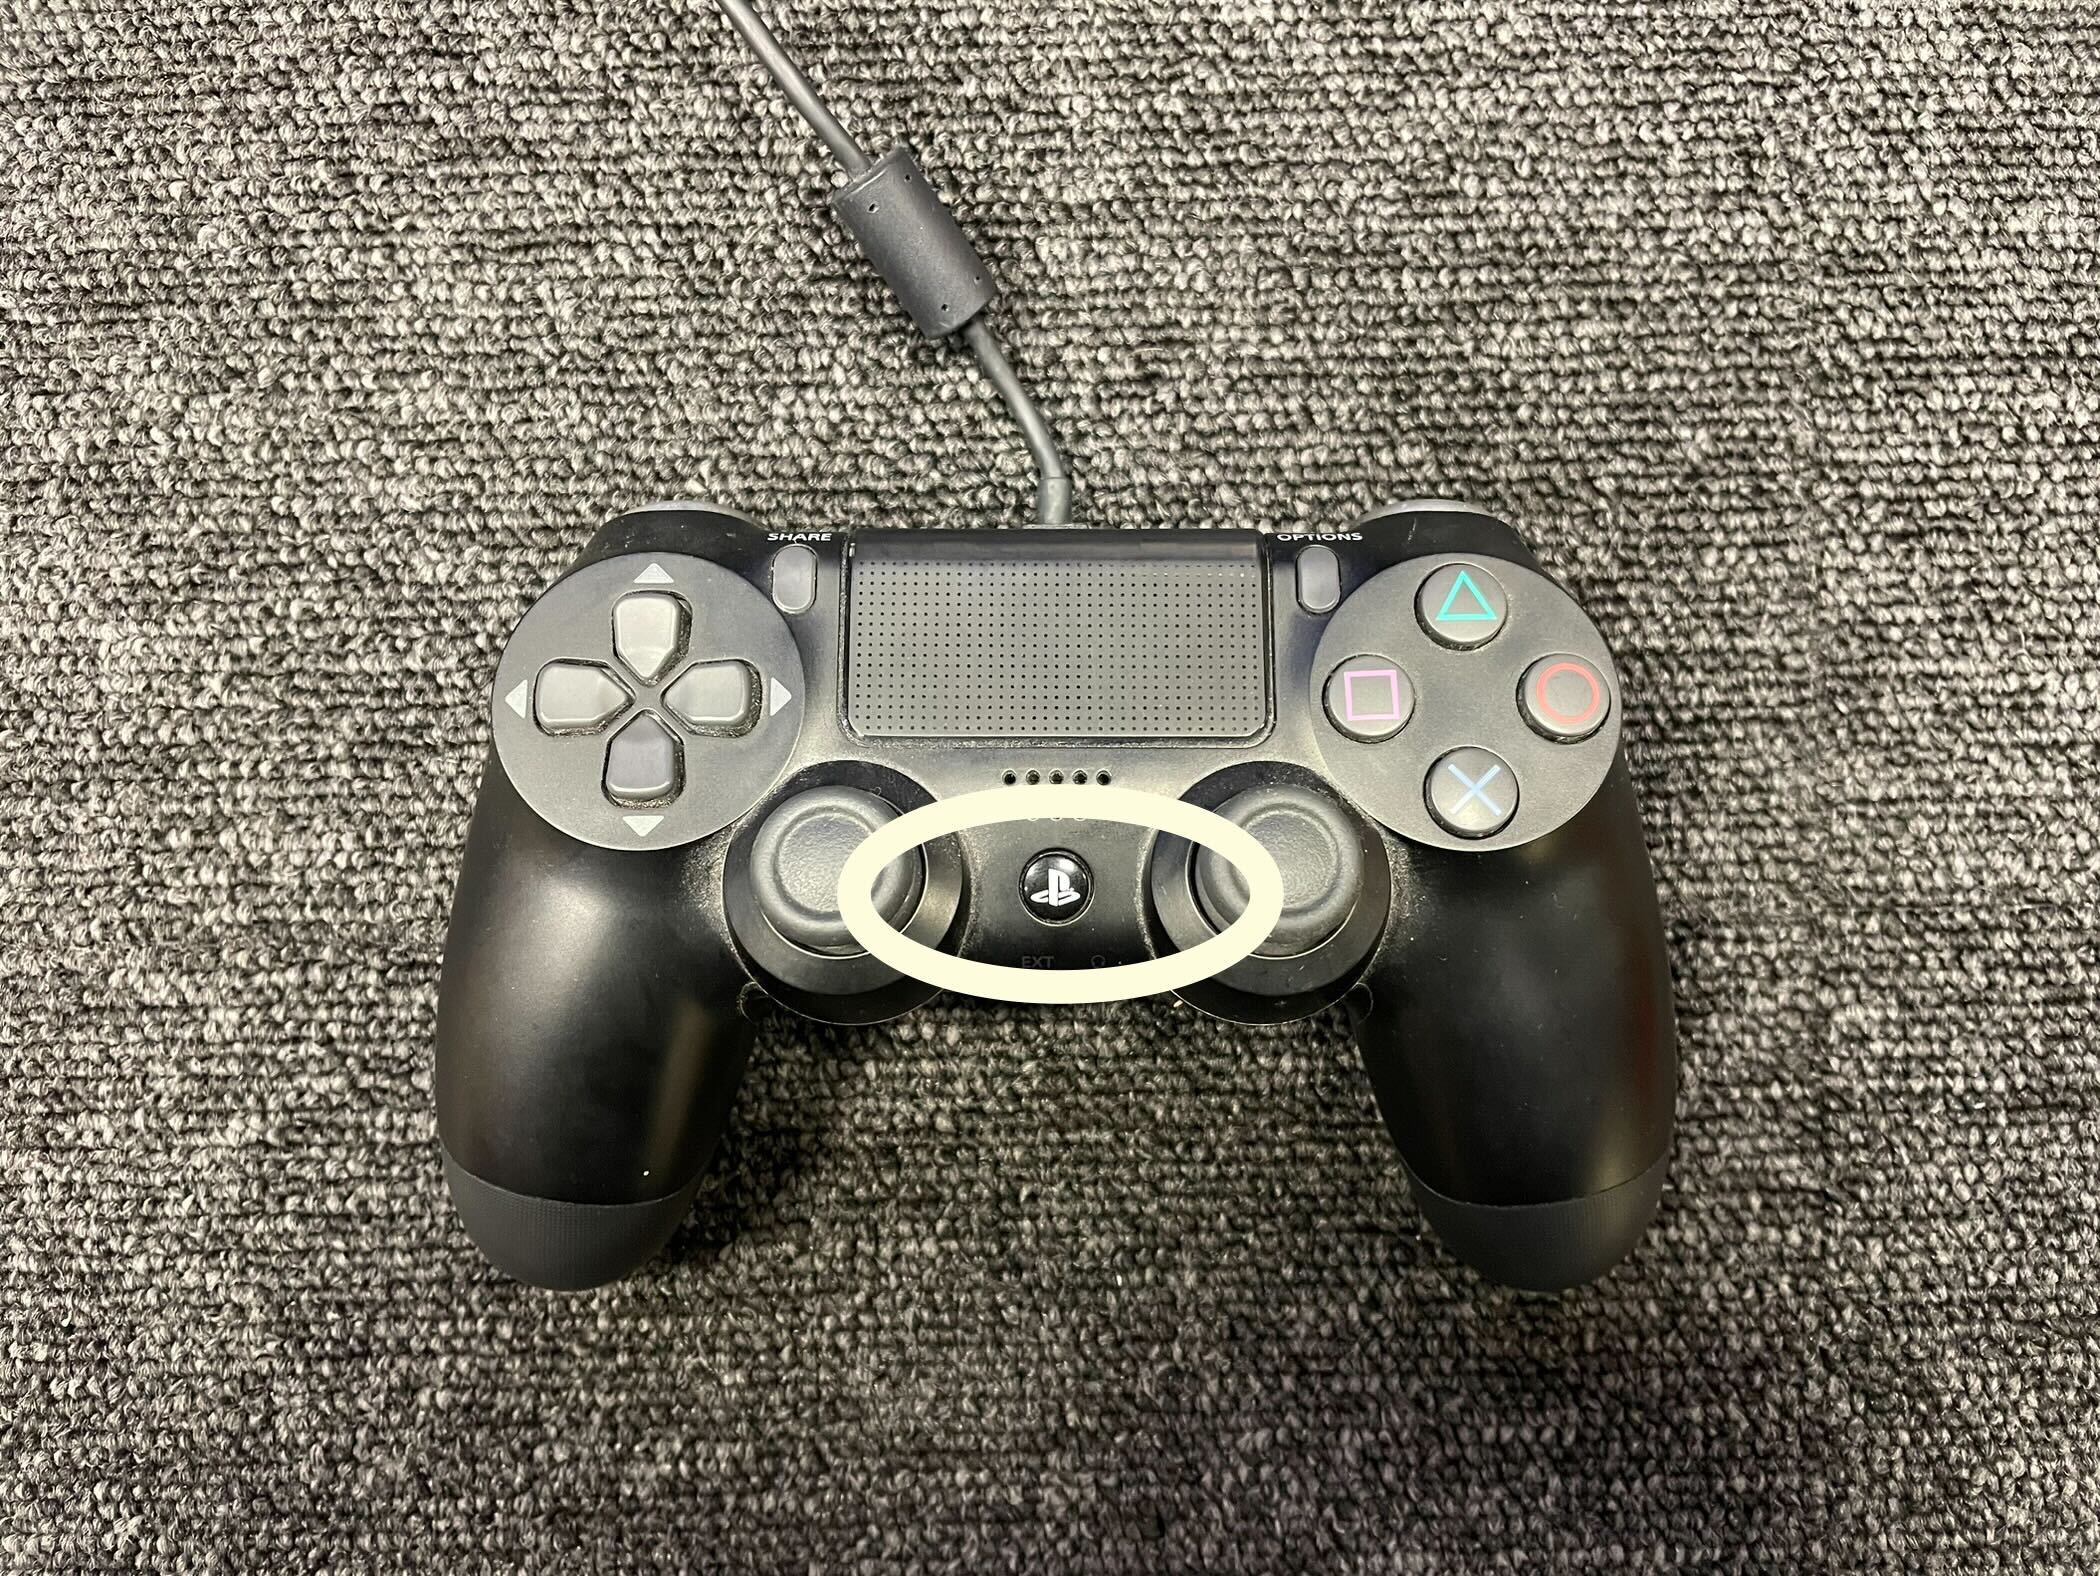 Turn off the PS4 by holding down the power button for at least seven seconds until it beeps twice.
Connect the PS4 controller to the PS4 with a USB cable.